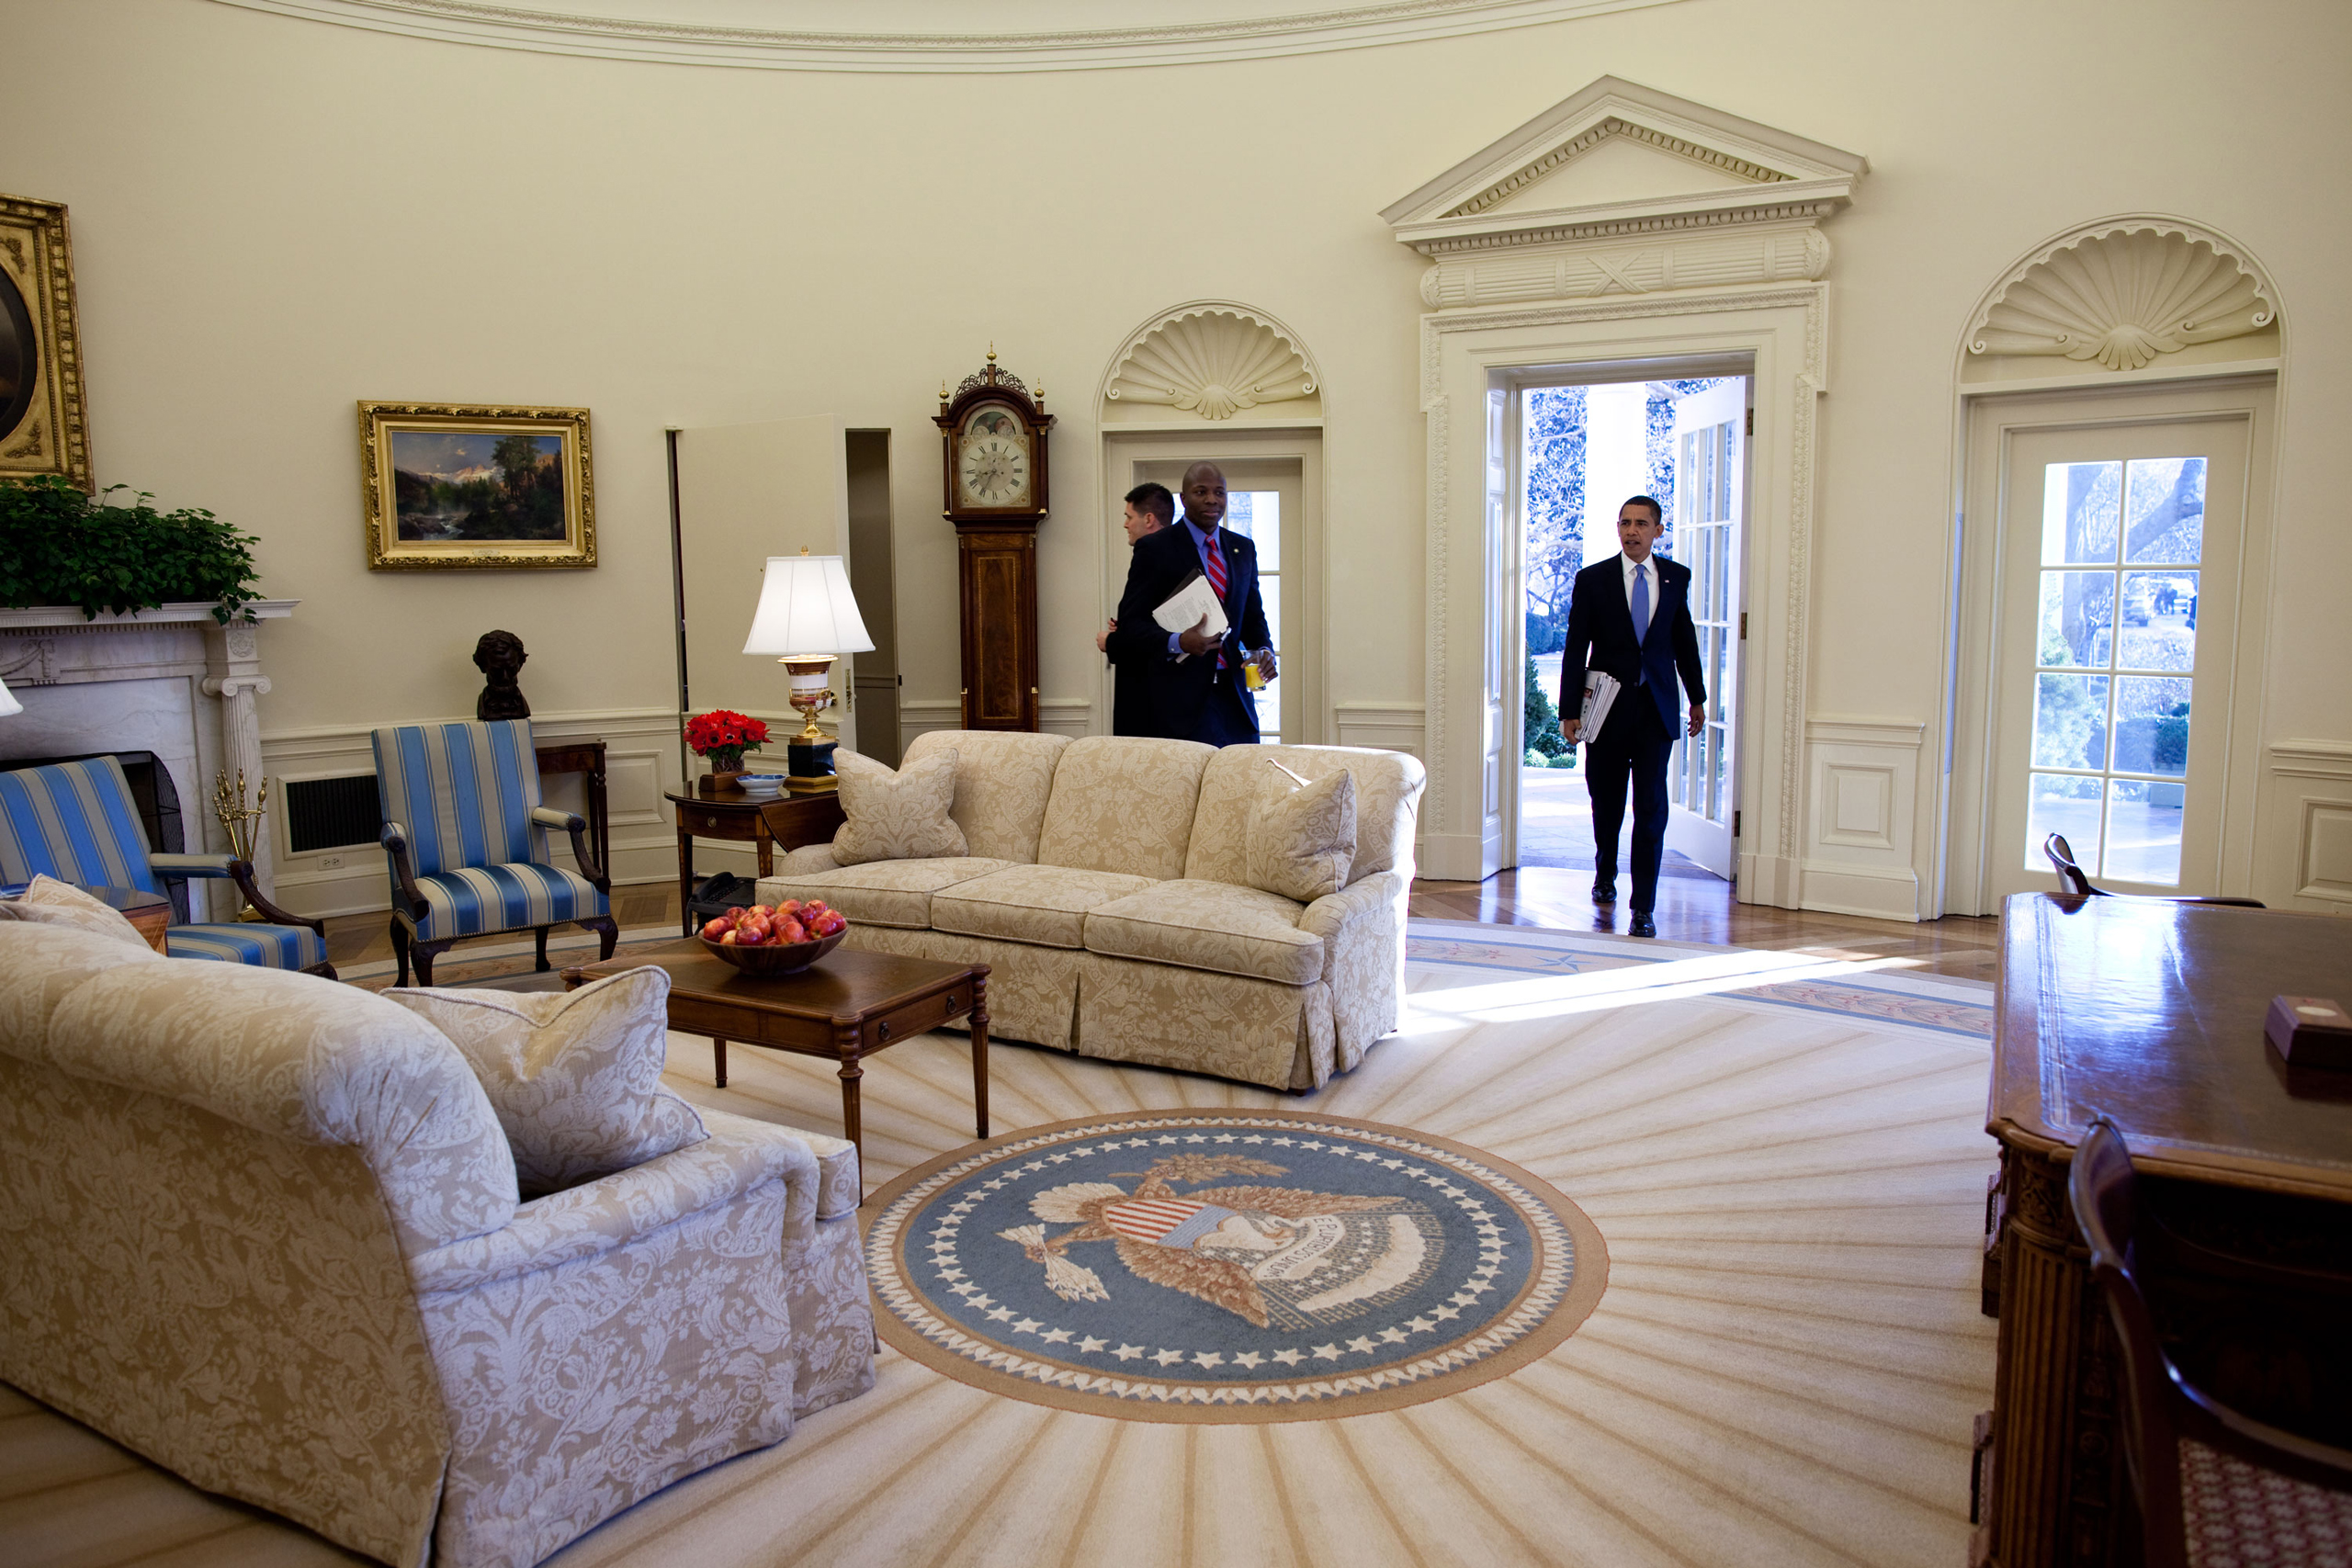 President Barack Obama walks into the Oval Office at the White House for his first full day in office on Jan. 21, 2009.